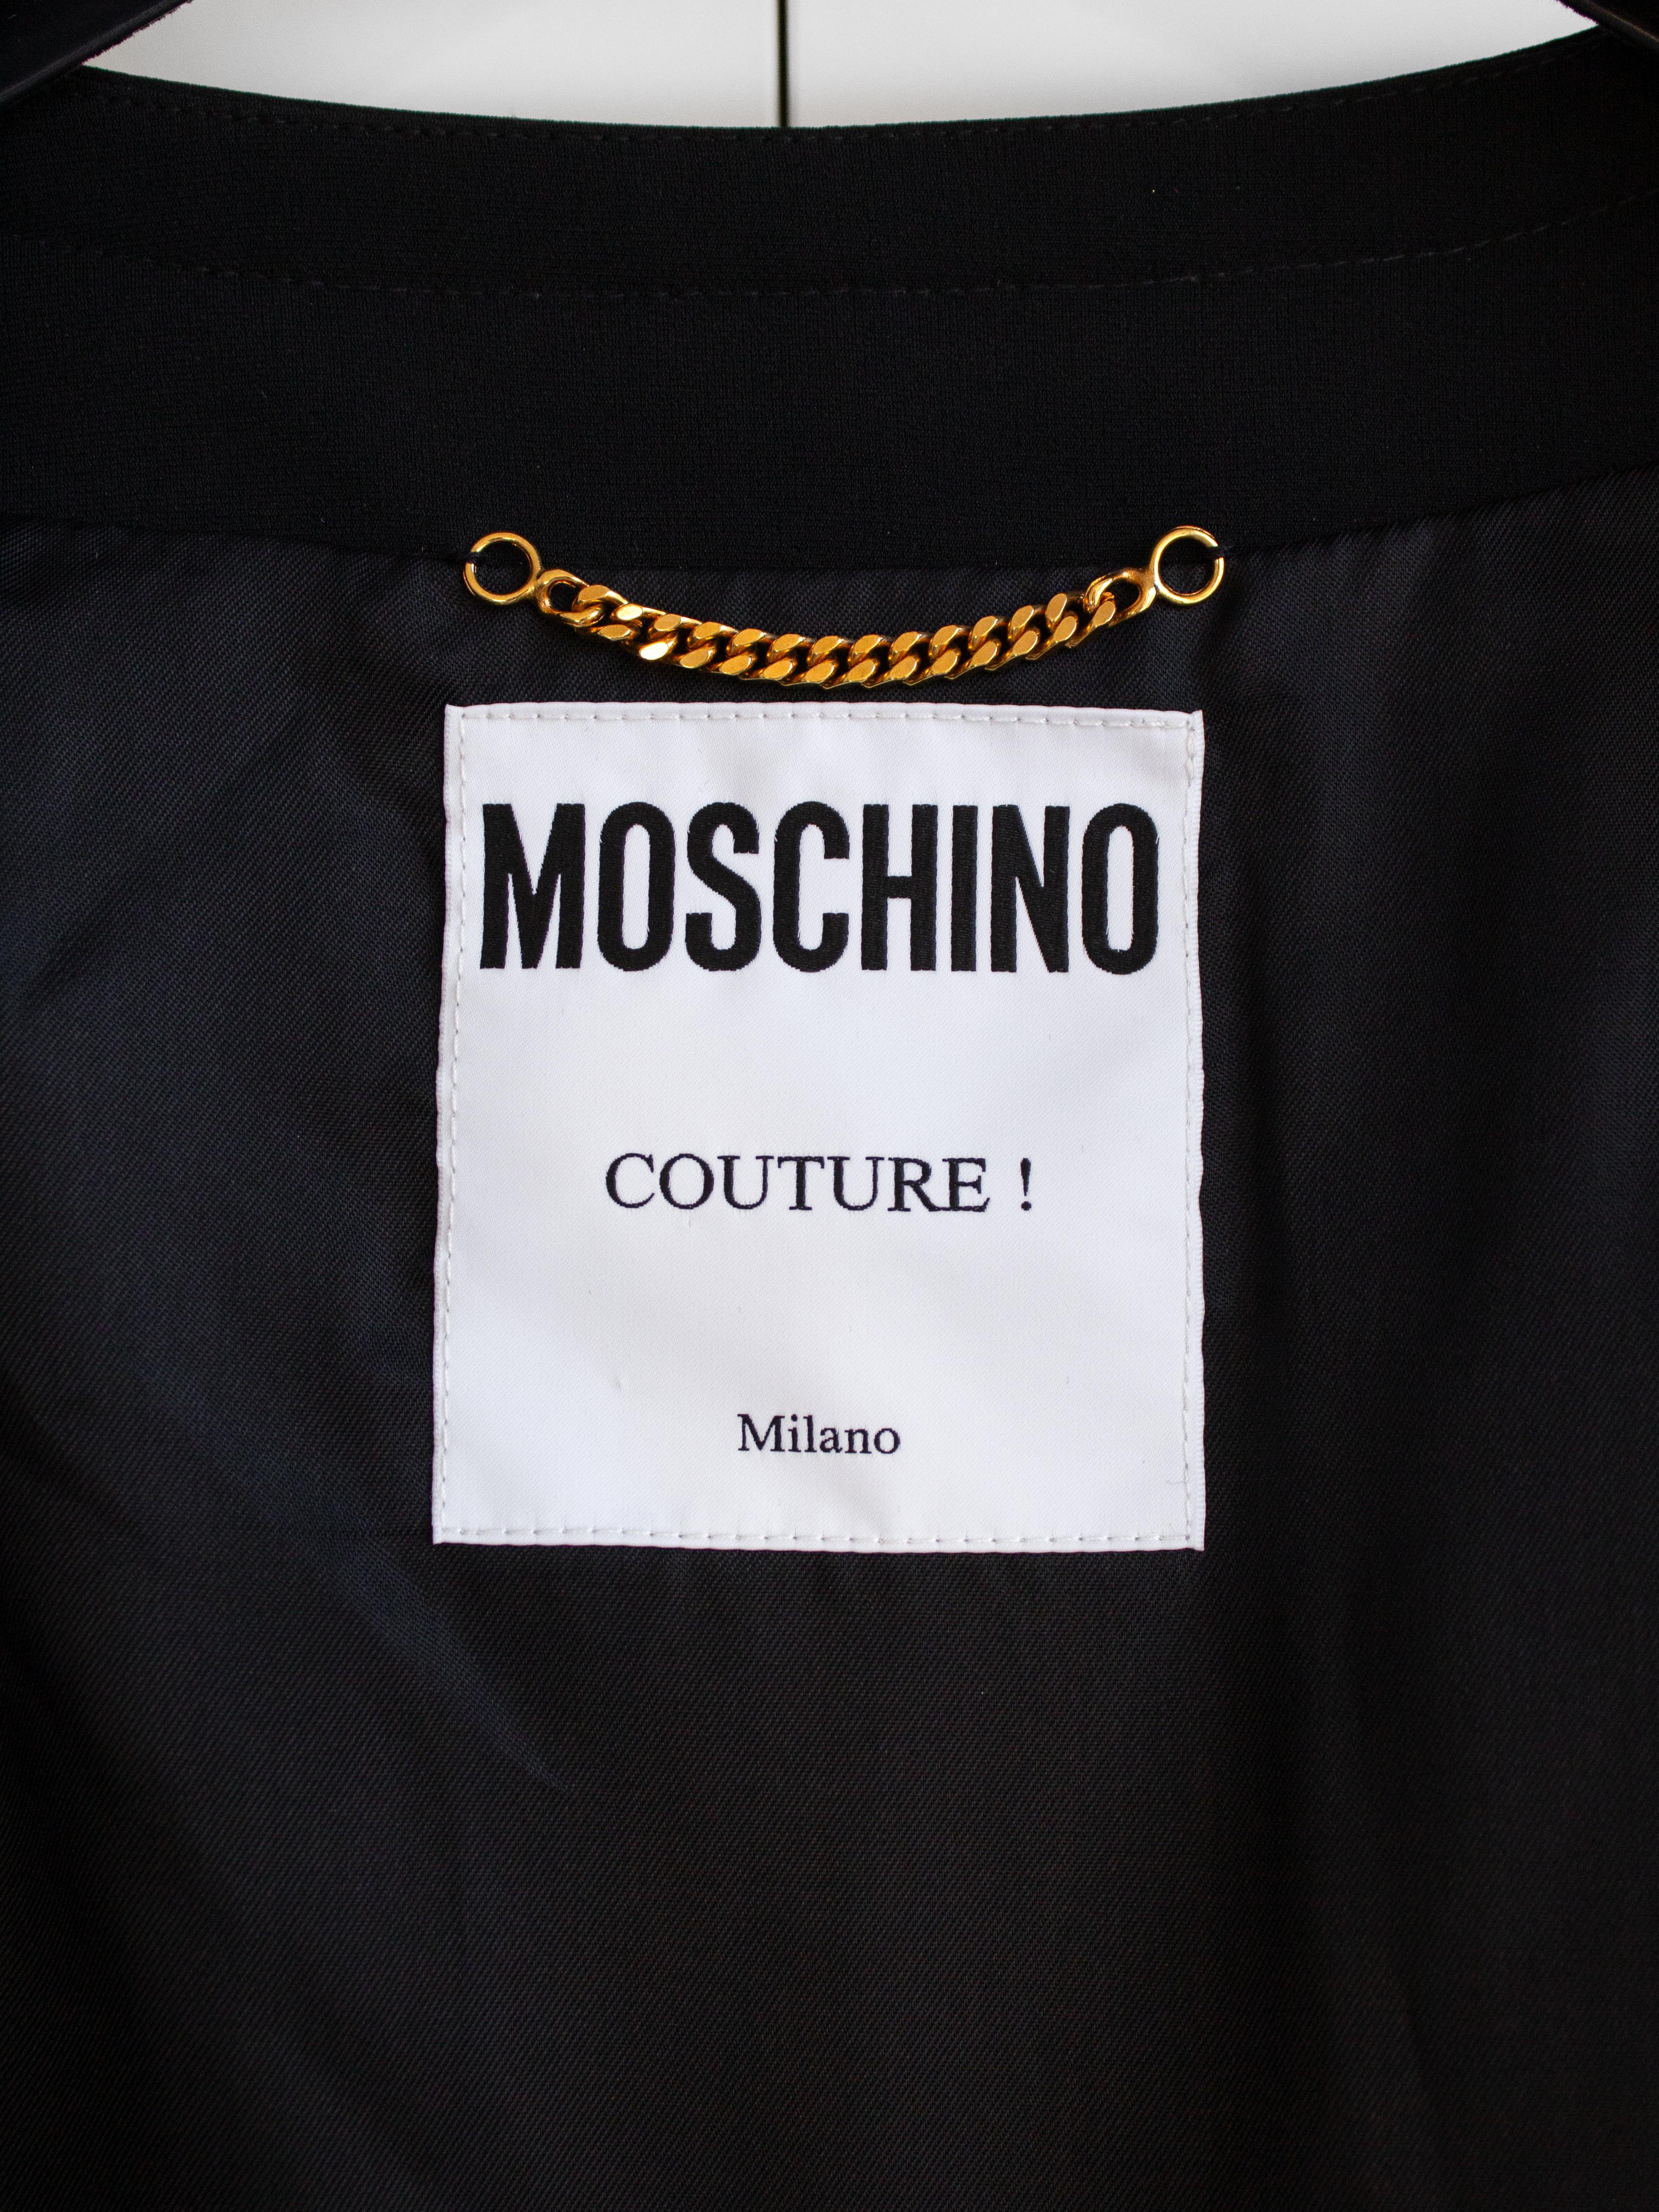 Moschino Couture S/S 2015 Barbie Crystal Embellished Rhinestone Black Jacket For Sale 2